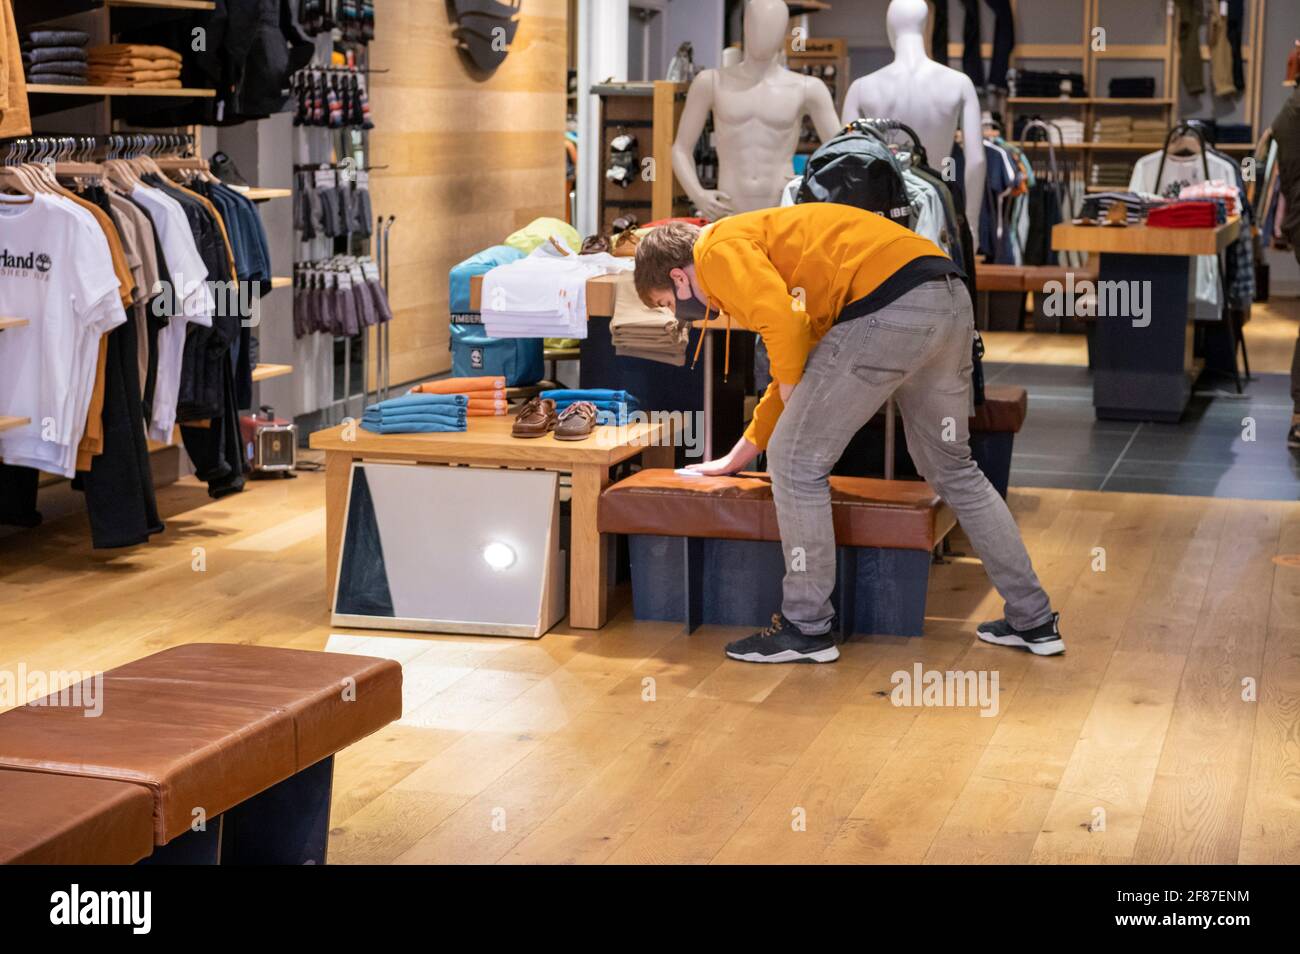 Cambridge, UK. 12th Apr, 2021. A member of staff cleans inside Timberland  clothes store as shops reopen in Cambridge as part of the UK easing of  Covid 19 lockdown restrictions. The roadmap